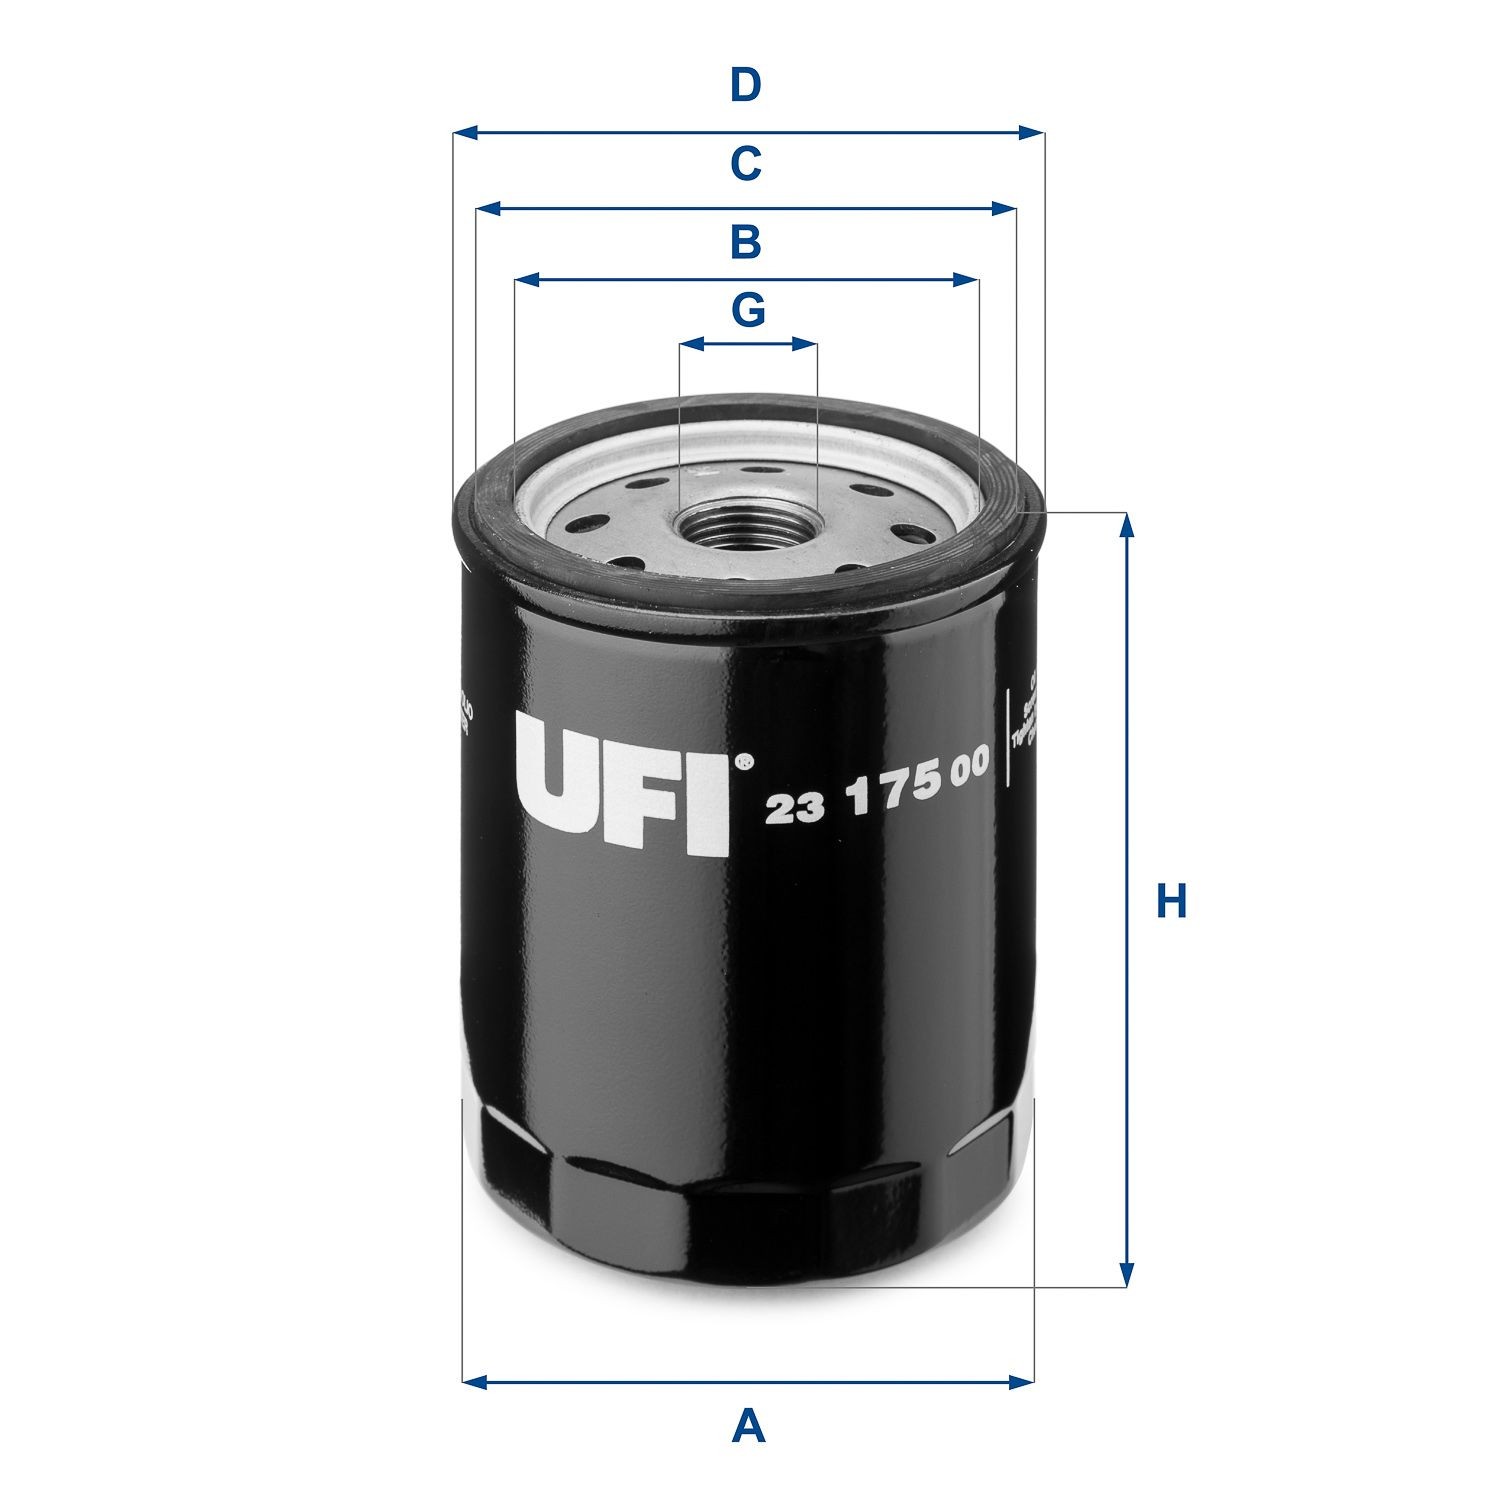 23.175.00 Oil filter 23.175.00 UFI 3/4-16 UNF, with one anti-return valve, Spin-on Filter